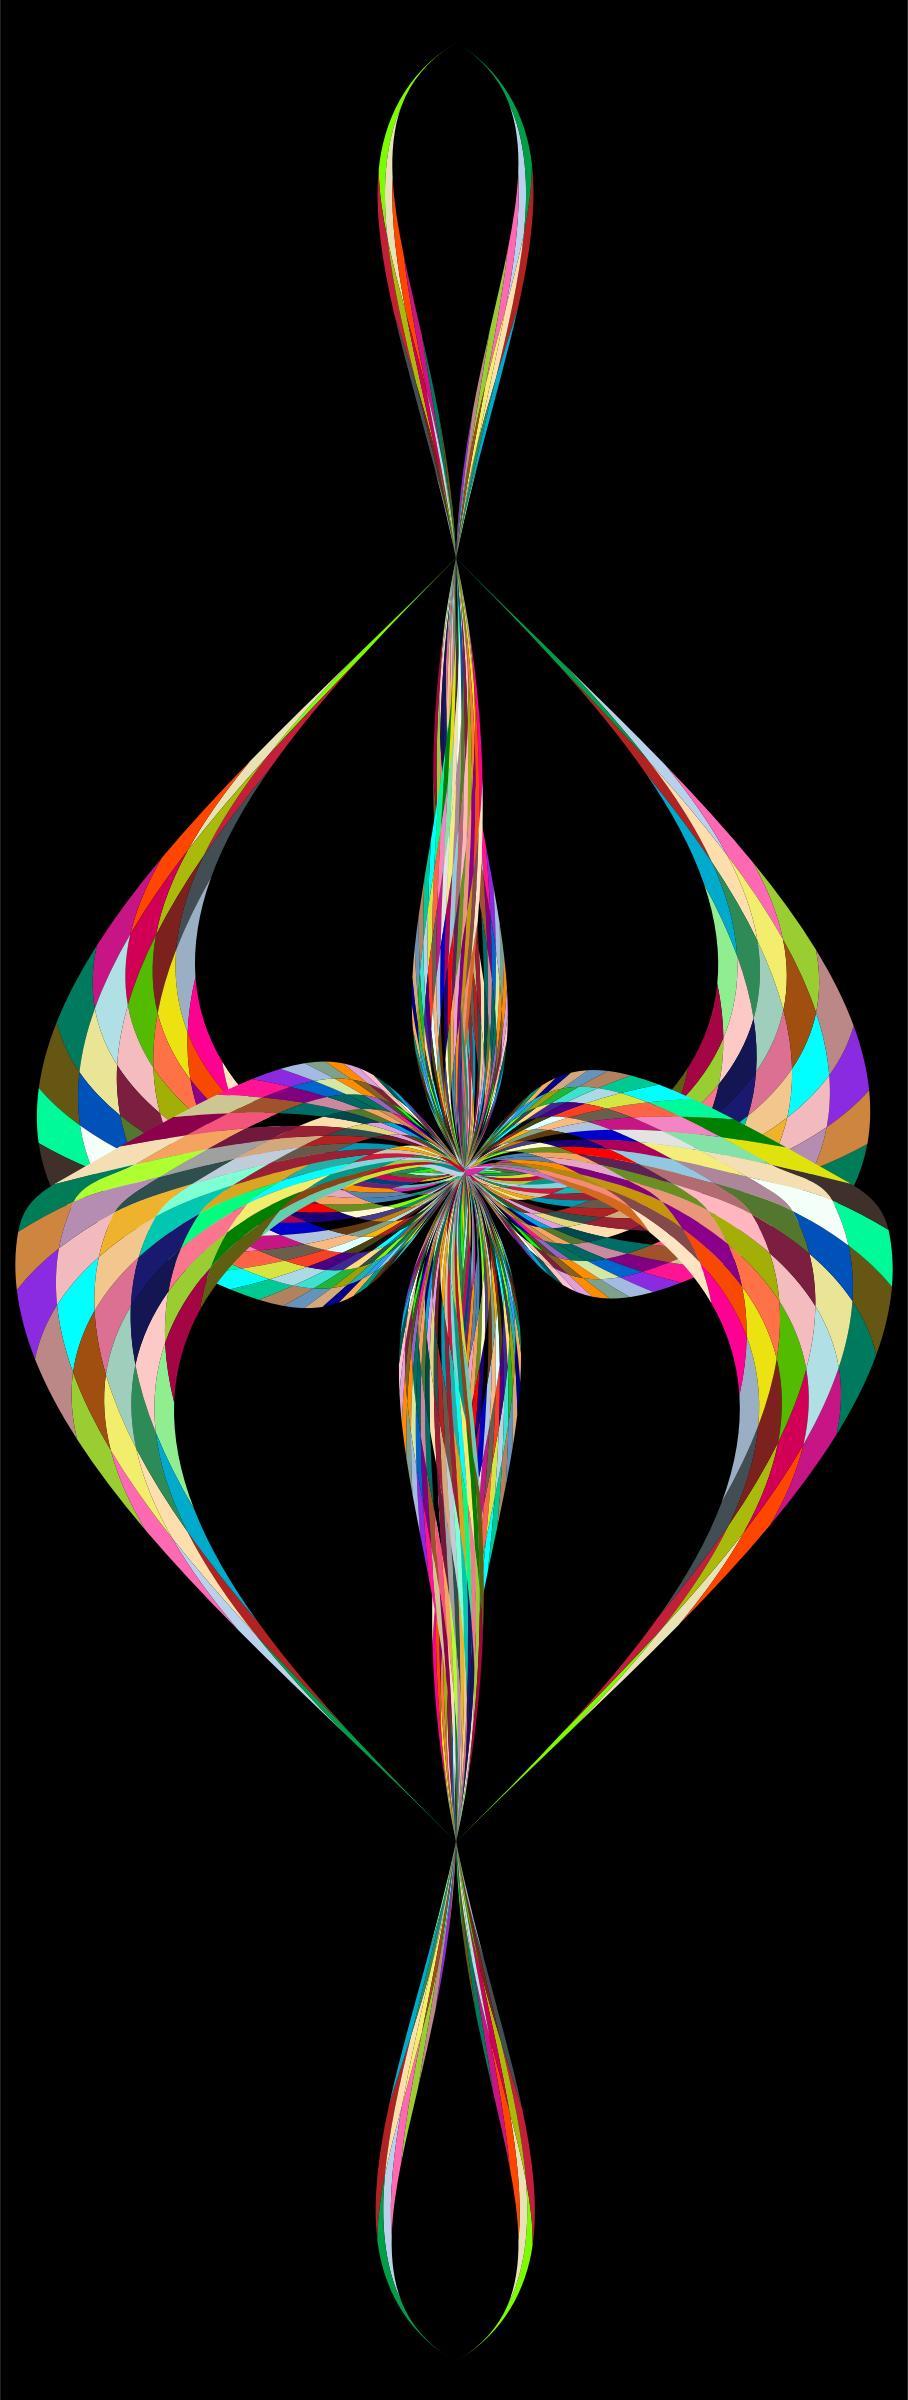 Colorful Stylized Cross 2 png transparent